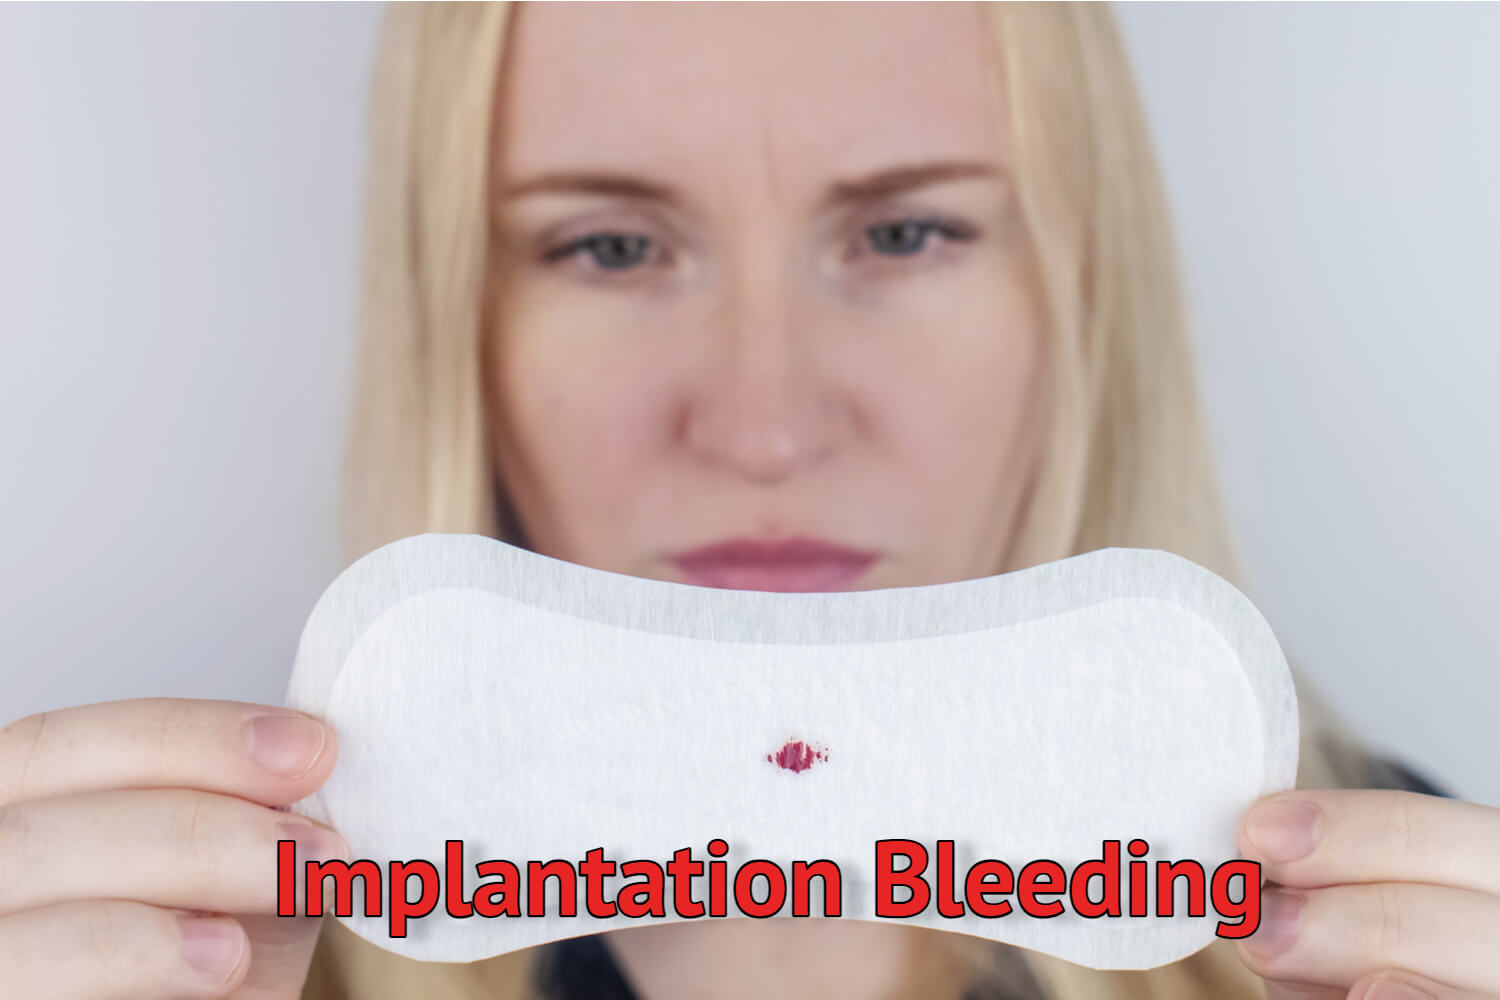 Implantation Bleeding - Symptoms And Treatment - Being The Parent